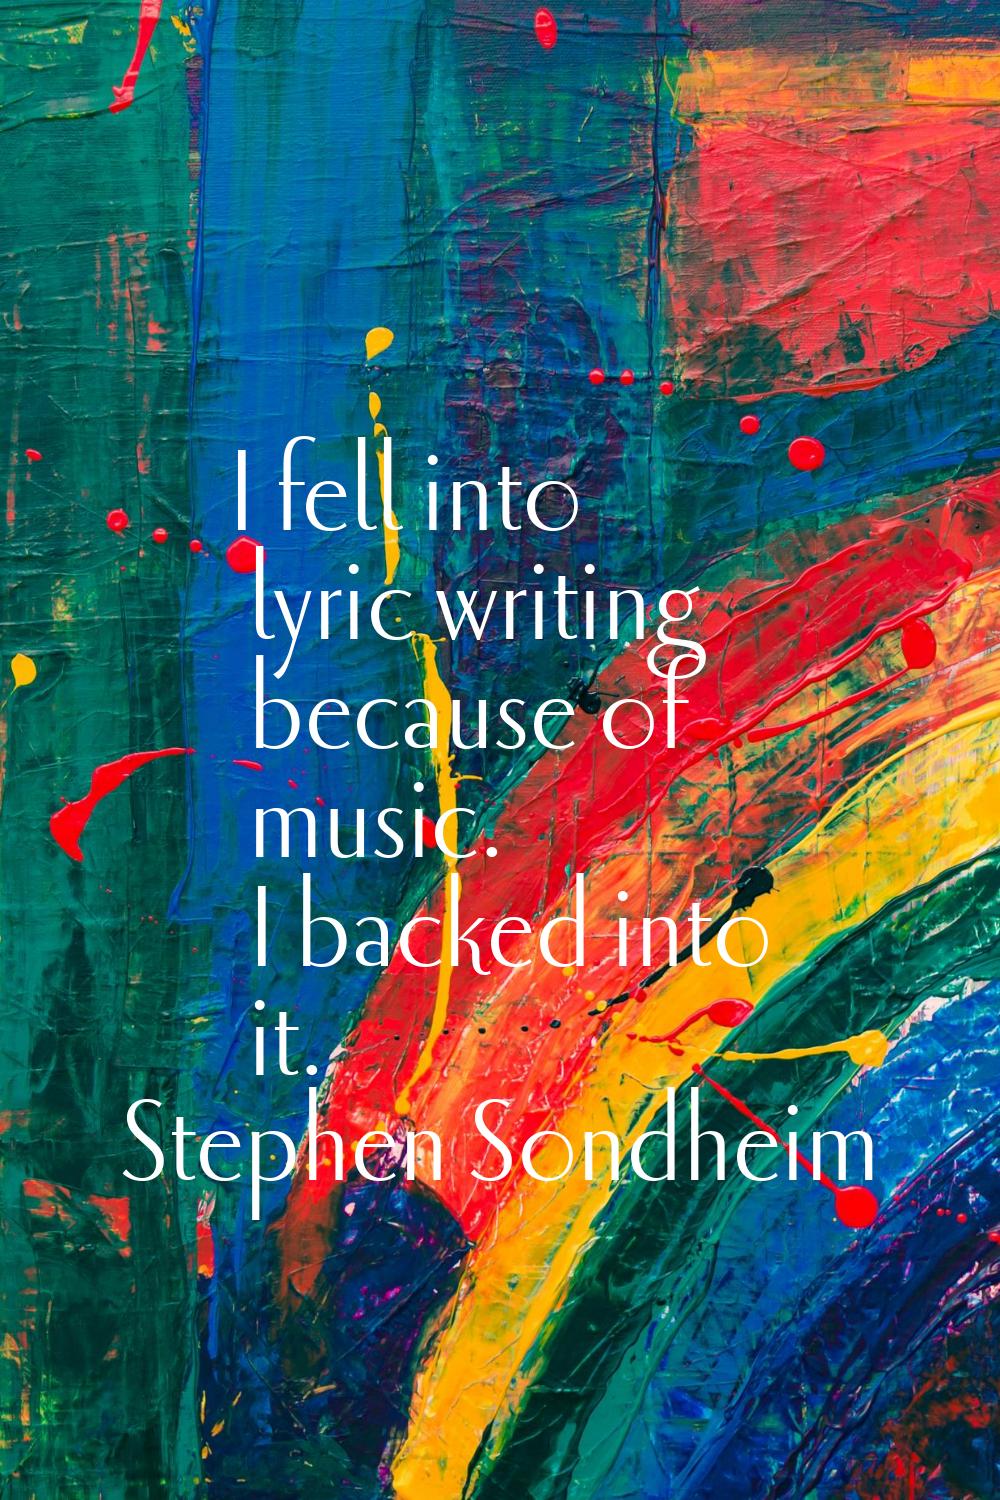 I fell into lyric writing because of music. I backed into it.